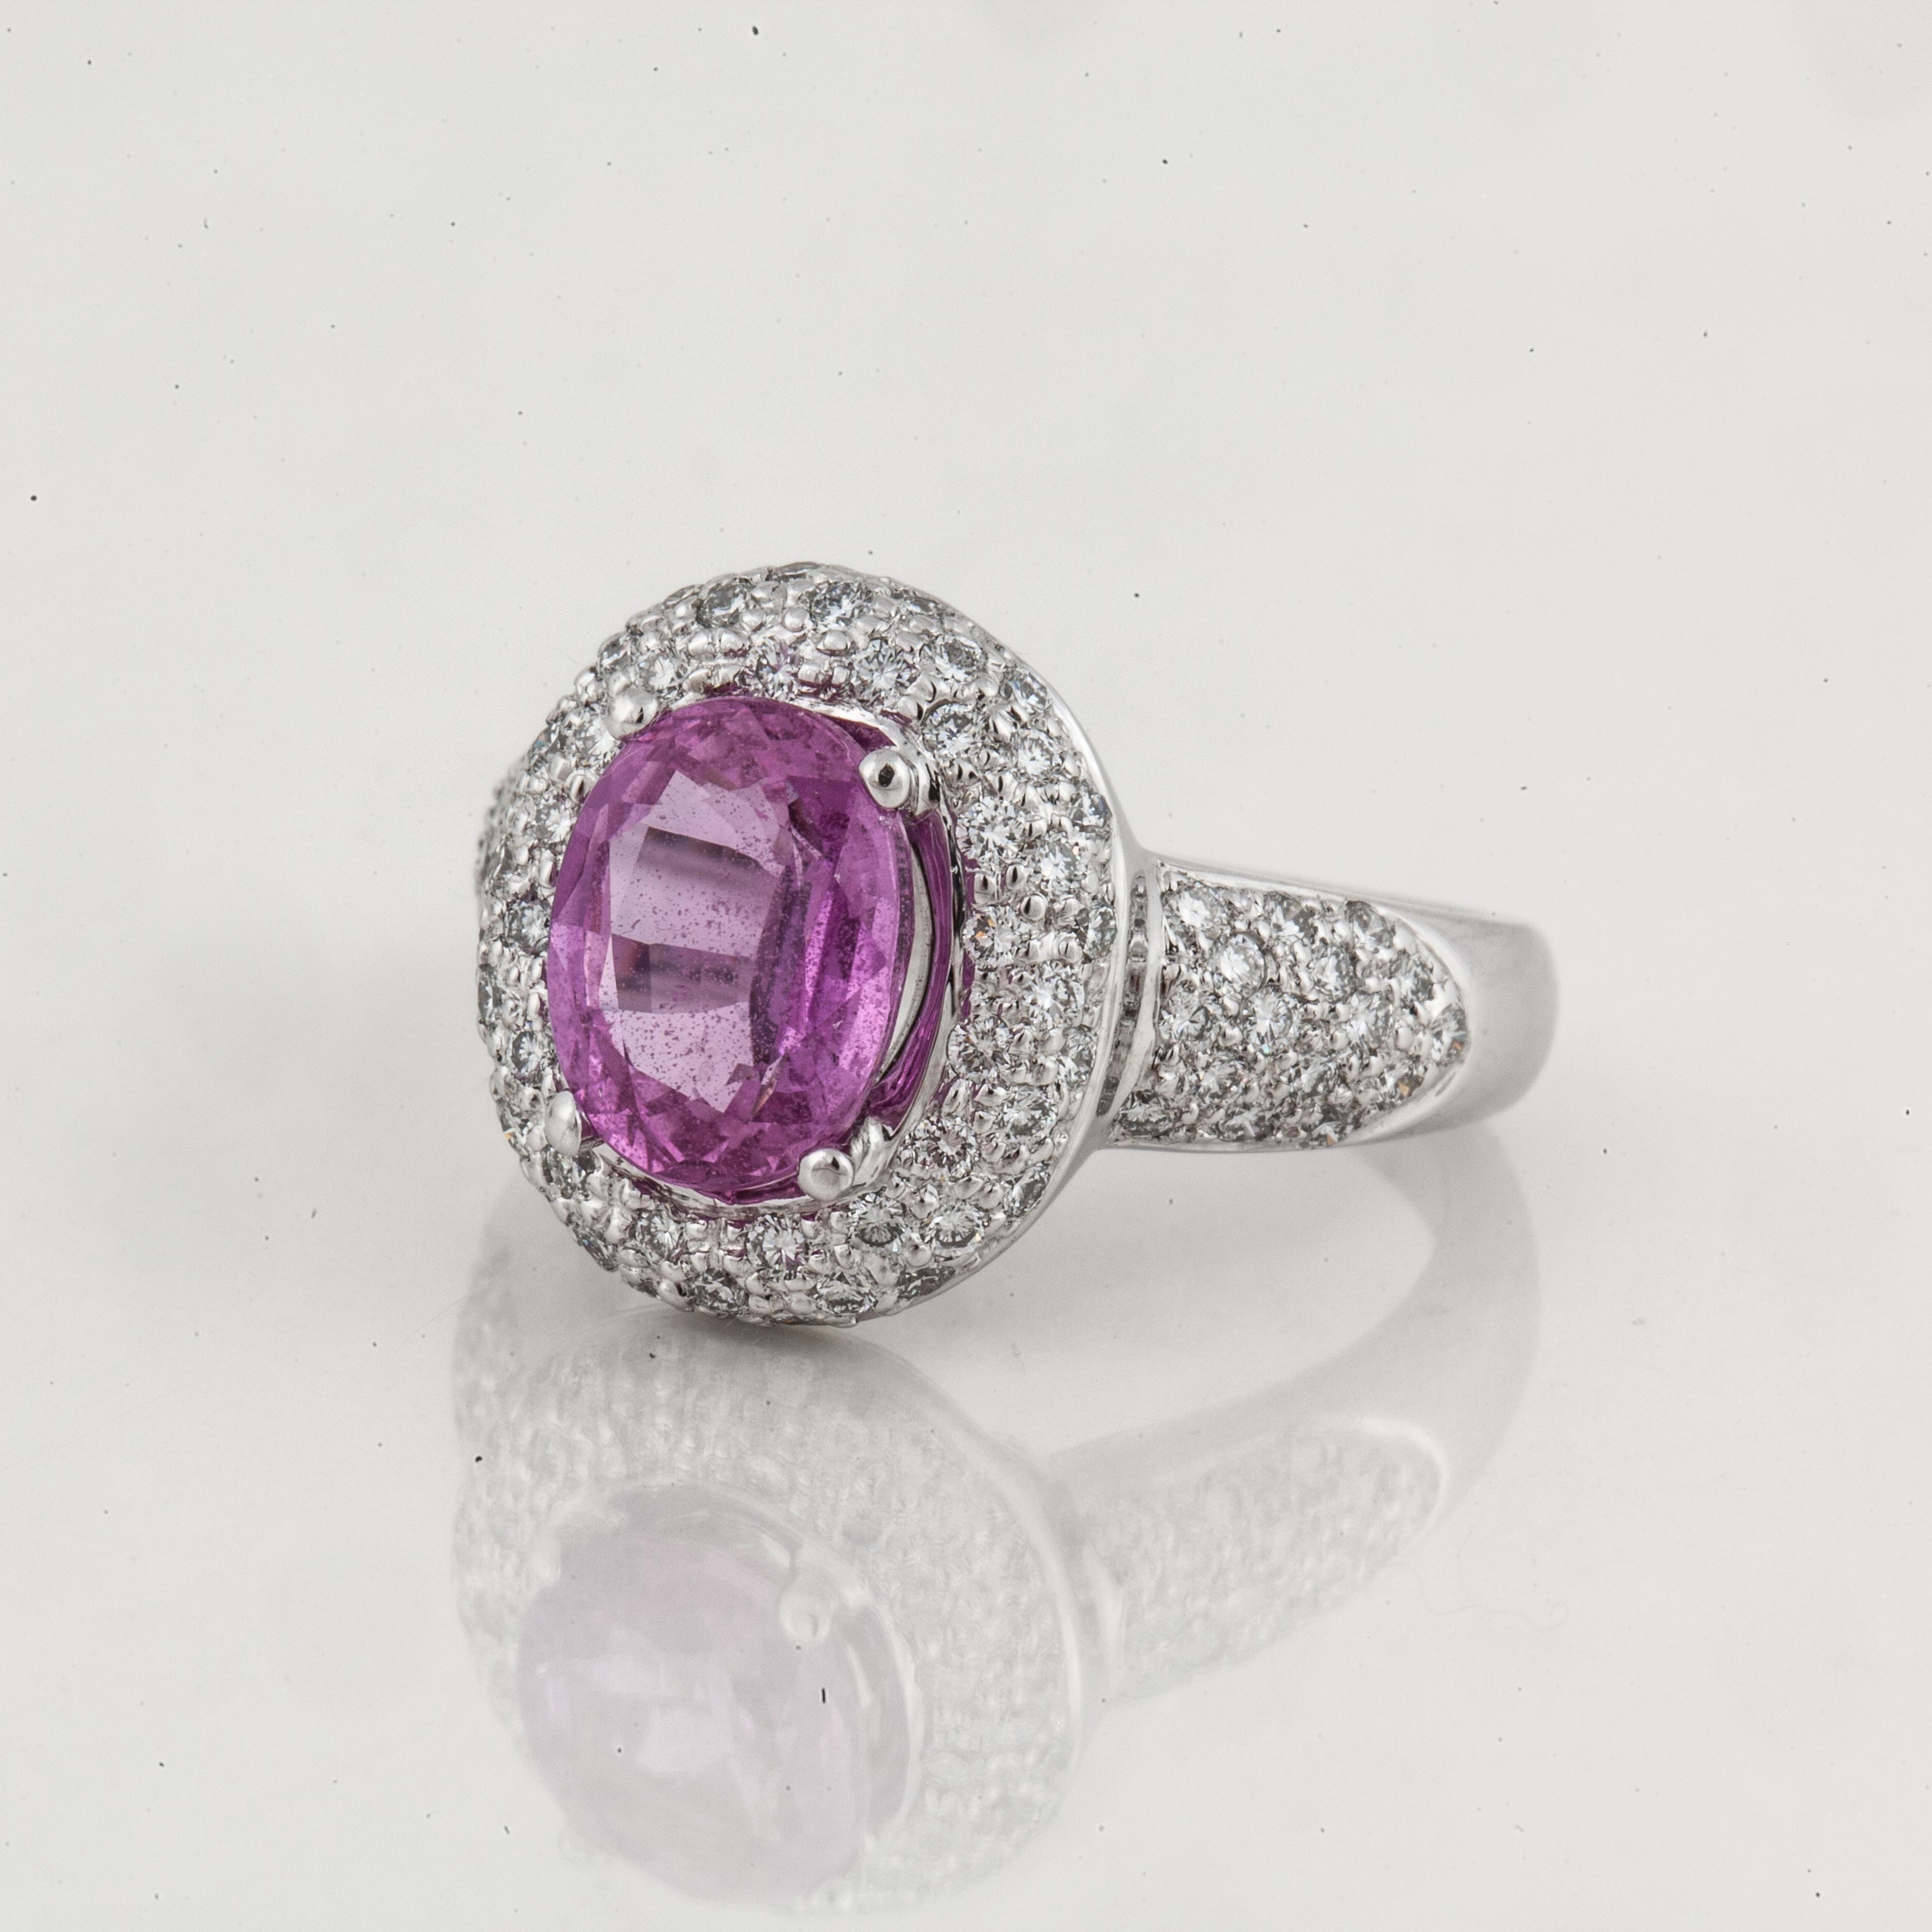 18K white gold ring featuring a 3.03 carat oval shaped pink sapphire surrounded by round diamonds.  There are eighty round diamonds that total 1.20 carats; H-I color and VS clarity.  The presentation area measures 3/4 of an inch by 3/8 of an inch